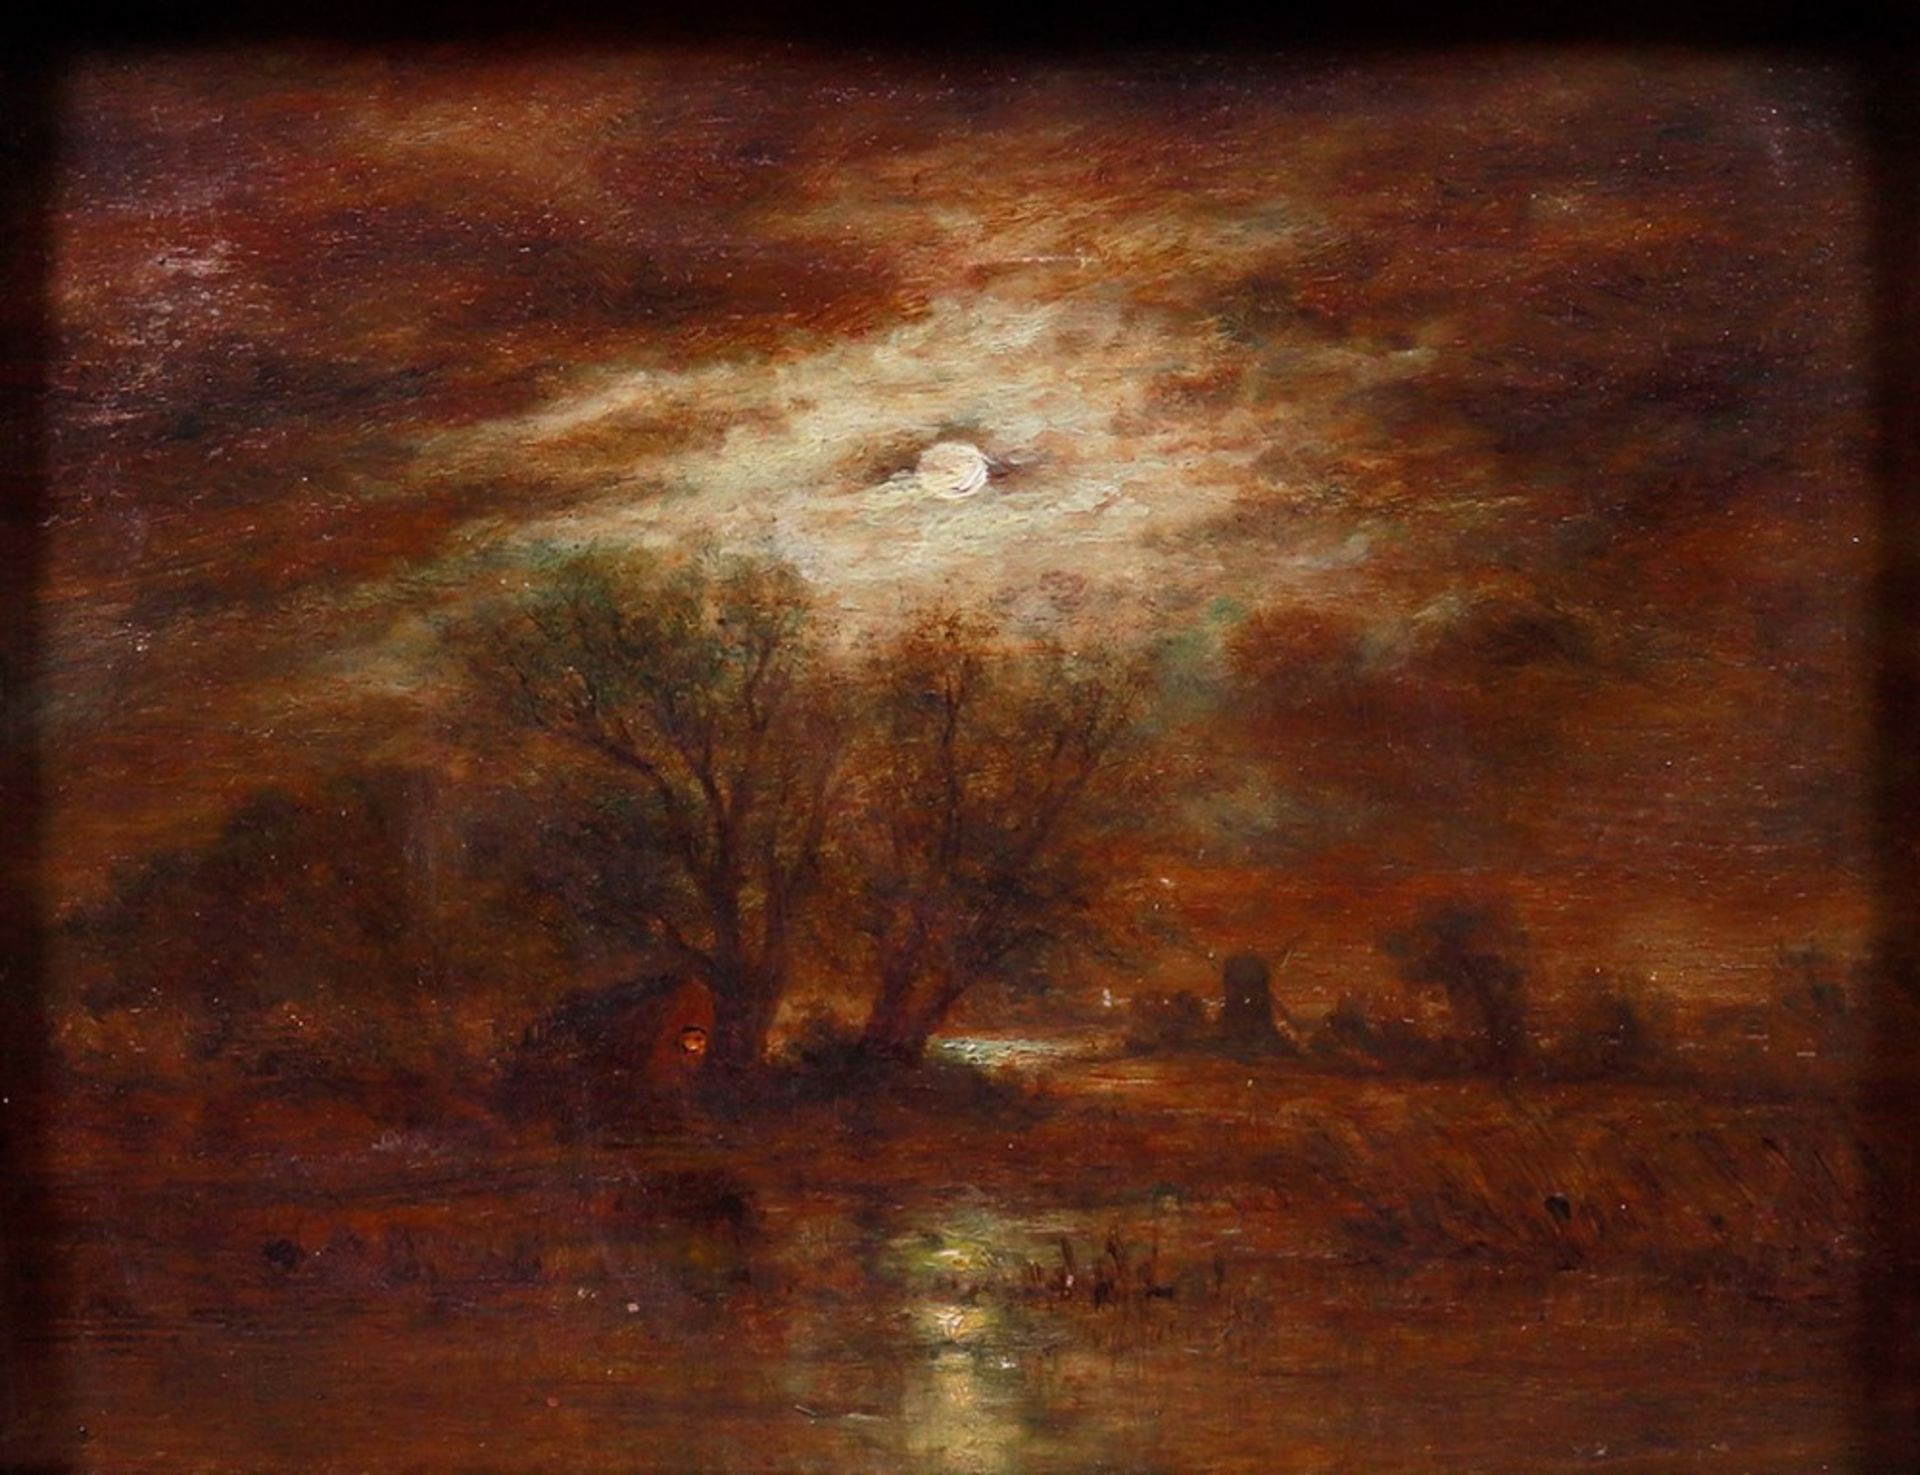 River landscape with windmill at dusk, c. 1900 - Image 2 of 3